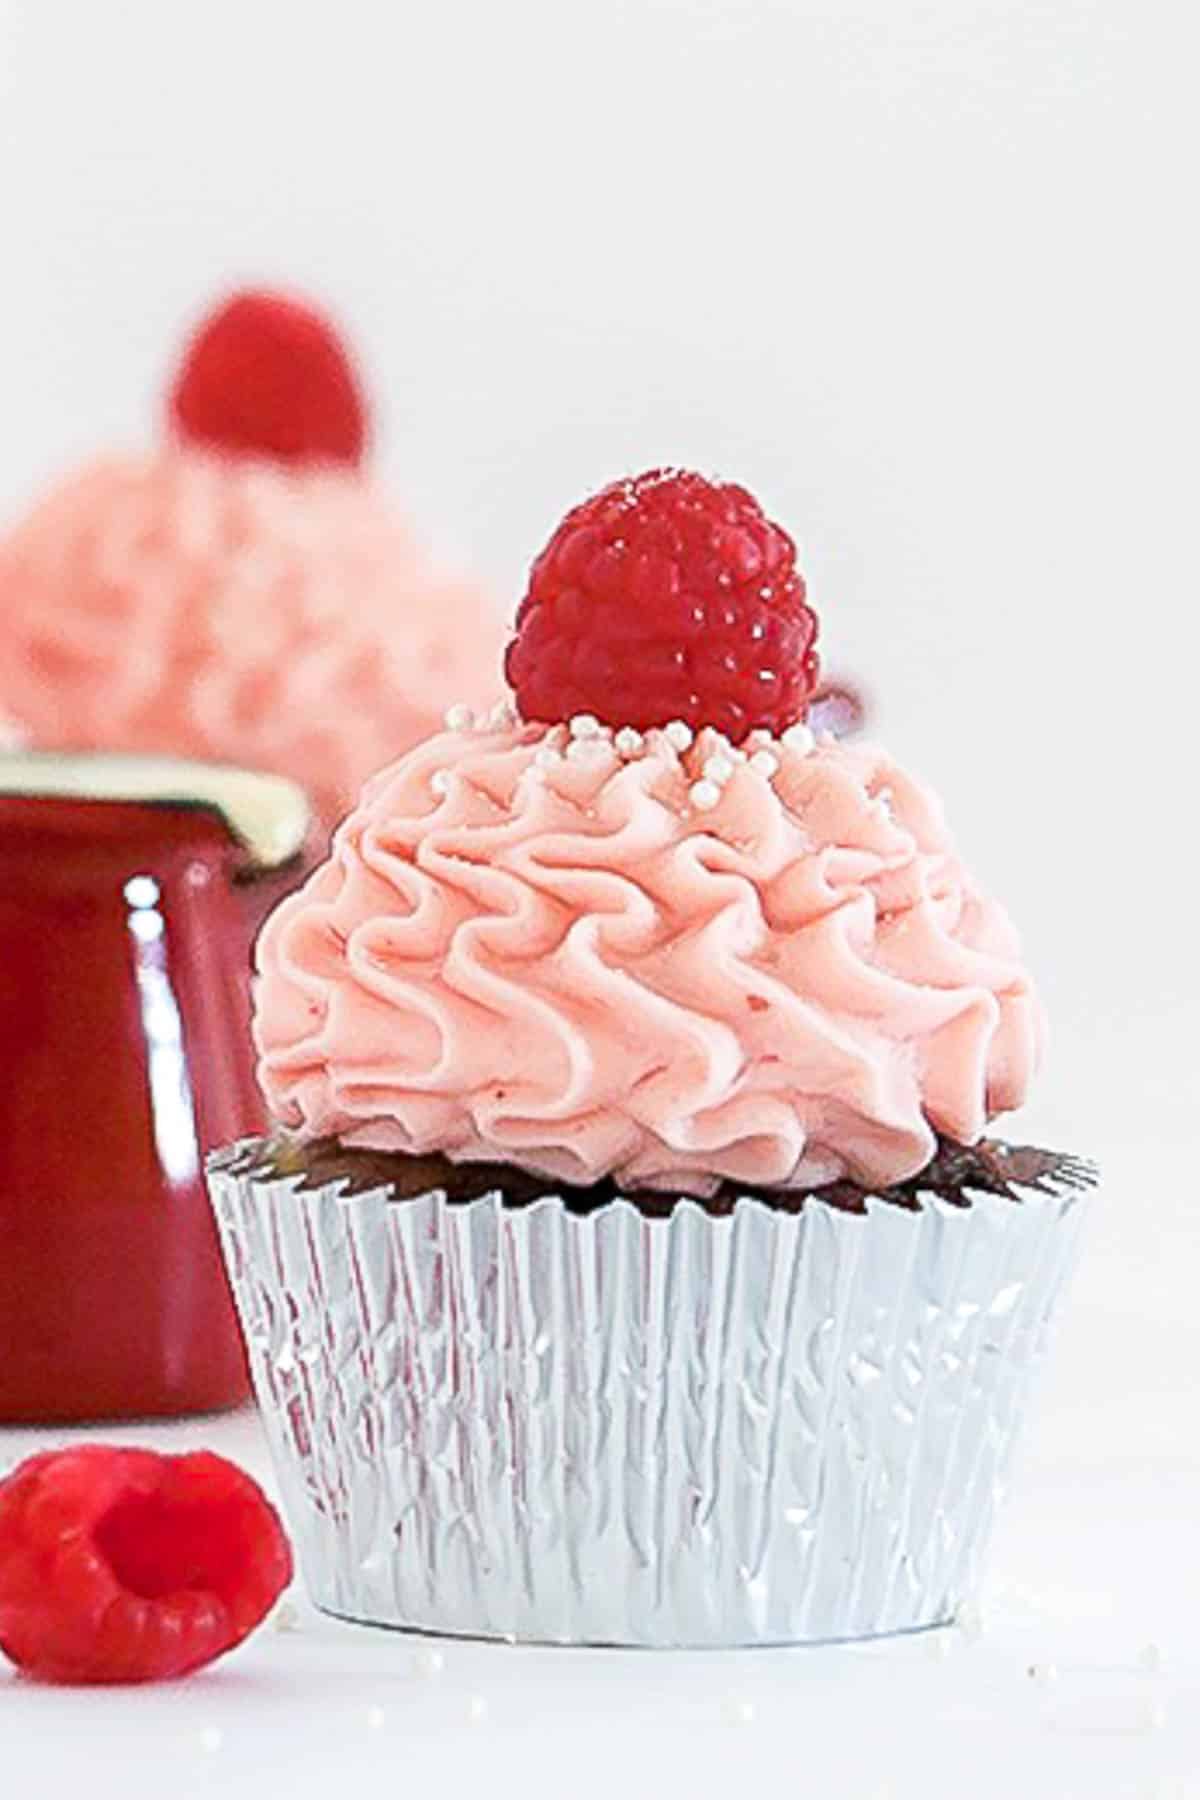 Chocolate raspberry cupcake iced with pink buttercream and topped with a fresh raspberry